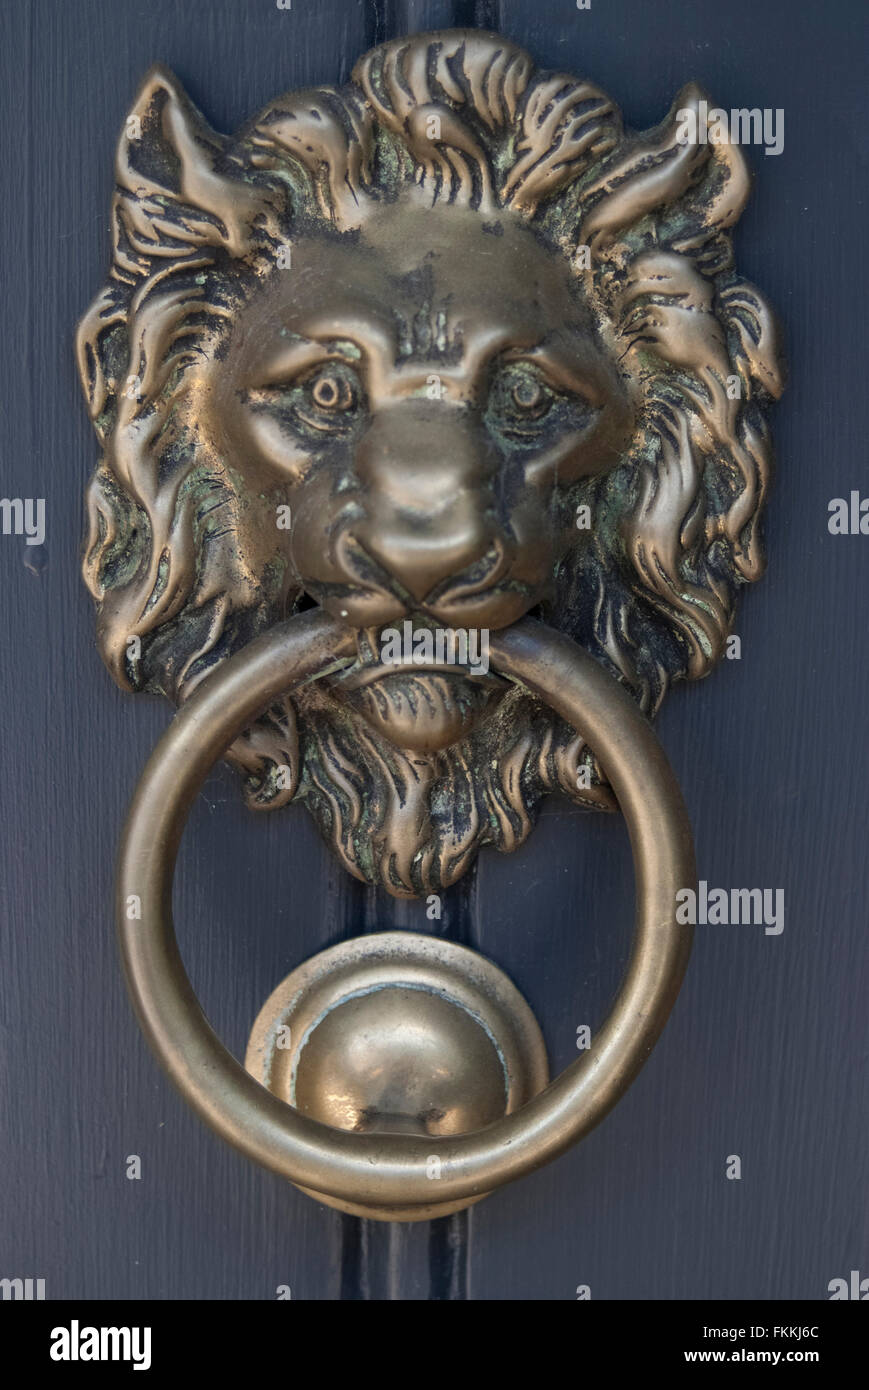 A gold lions head door knocker on a door, of a residential house. Stock Photo